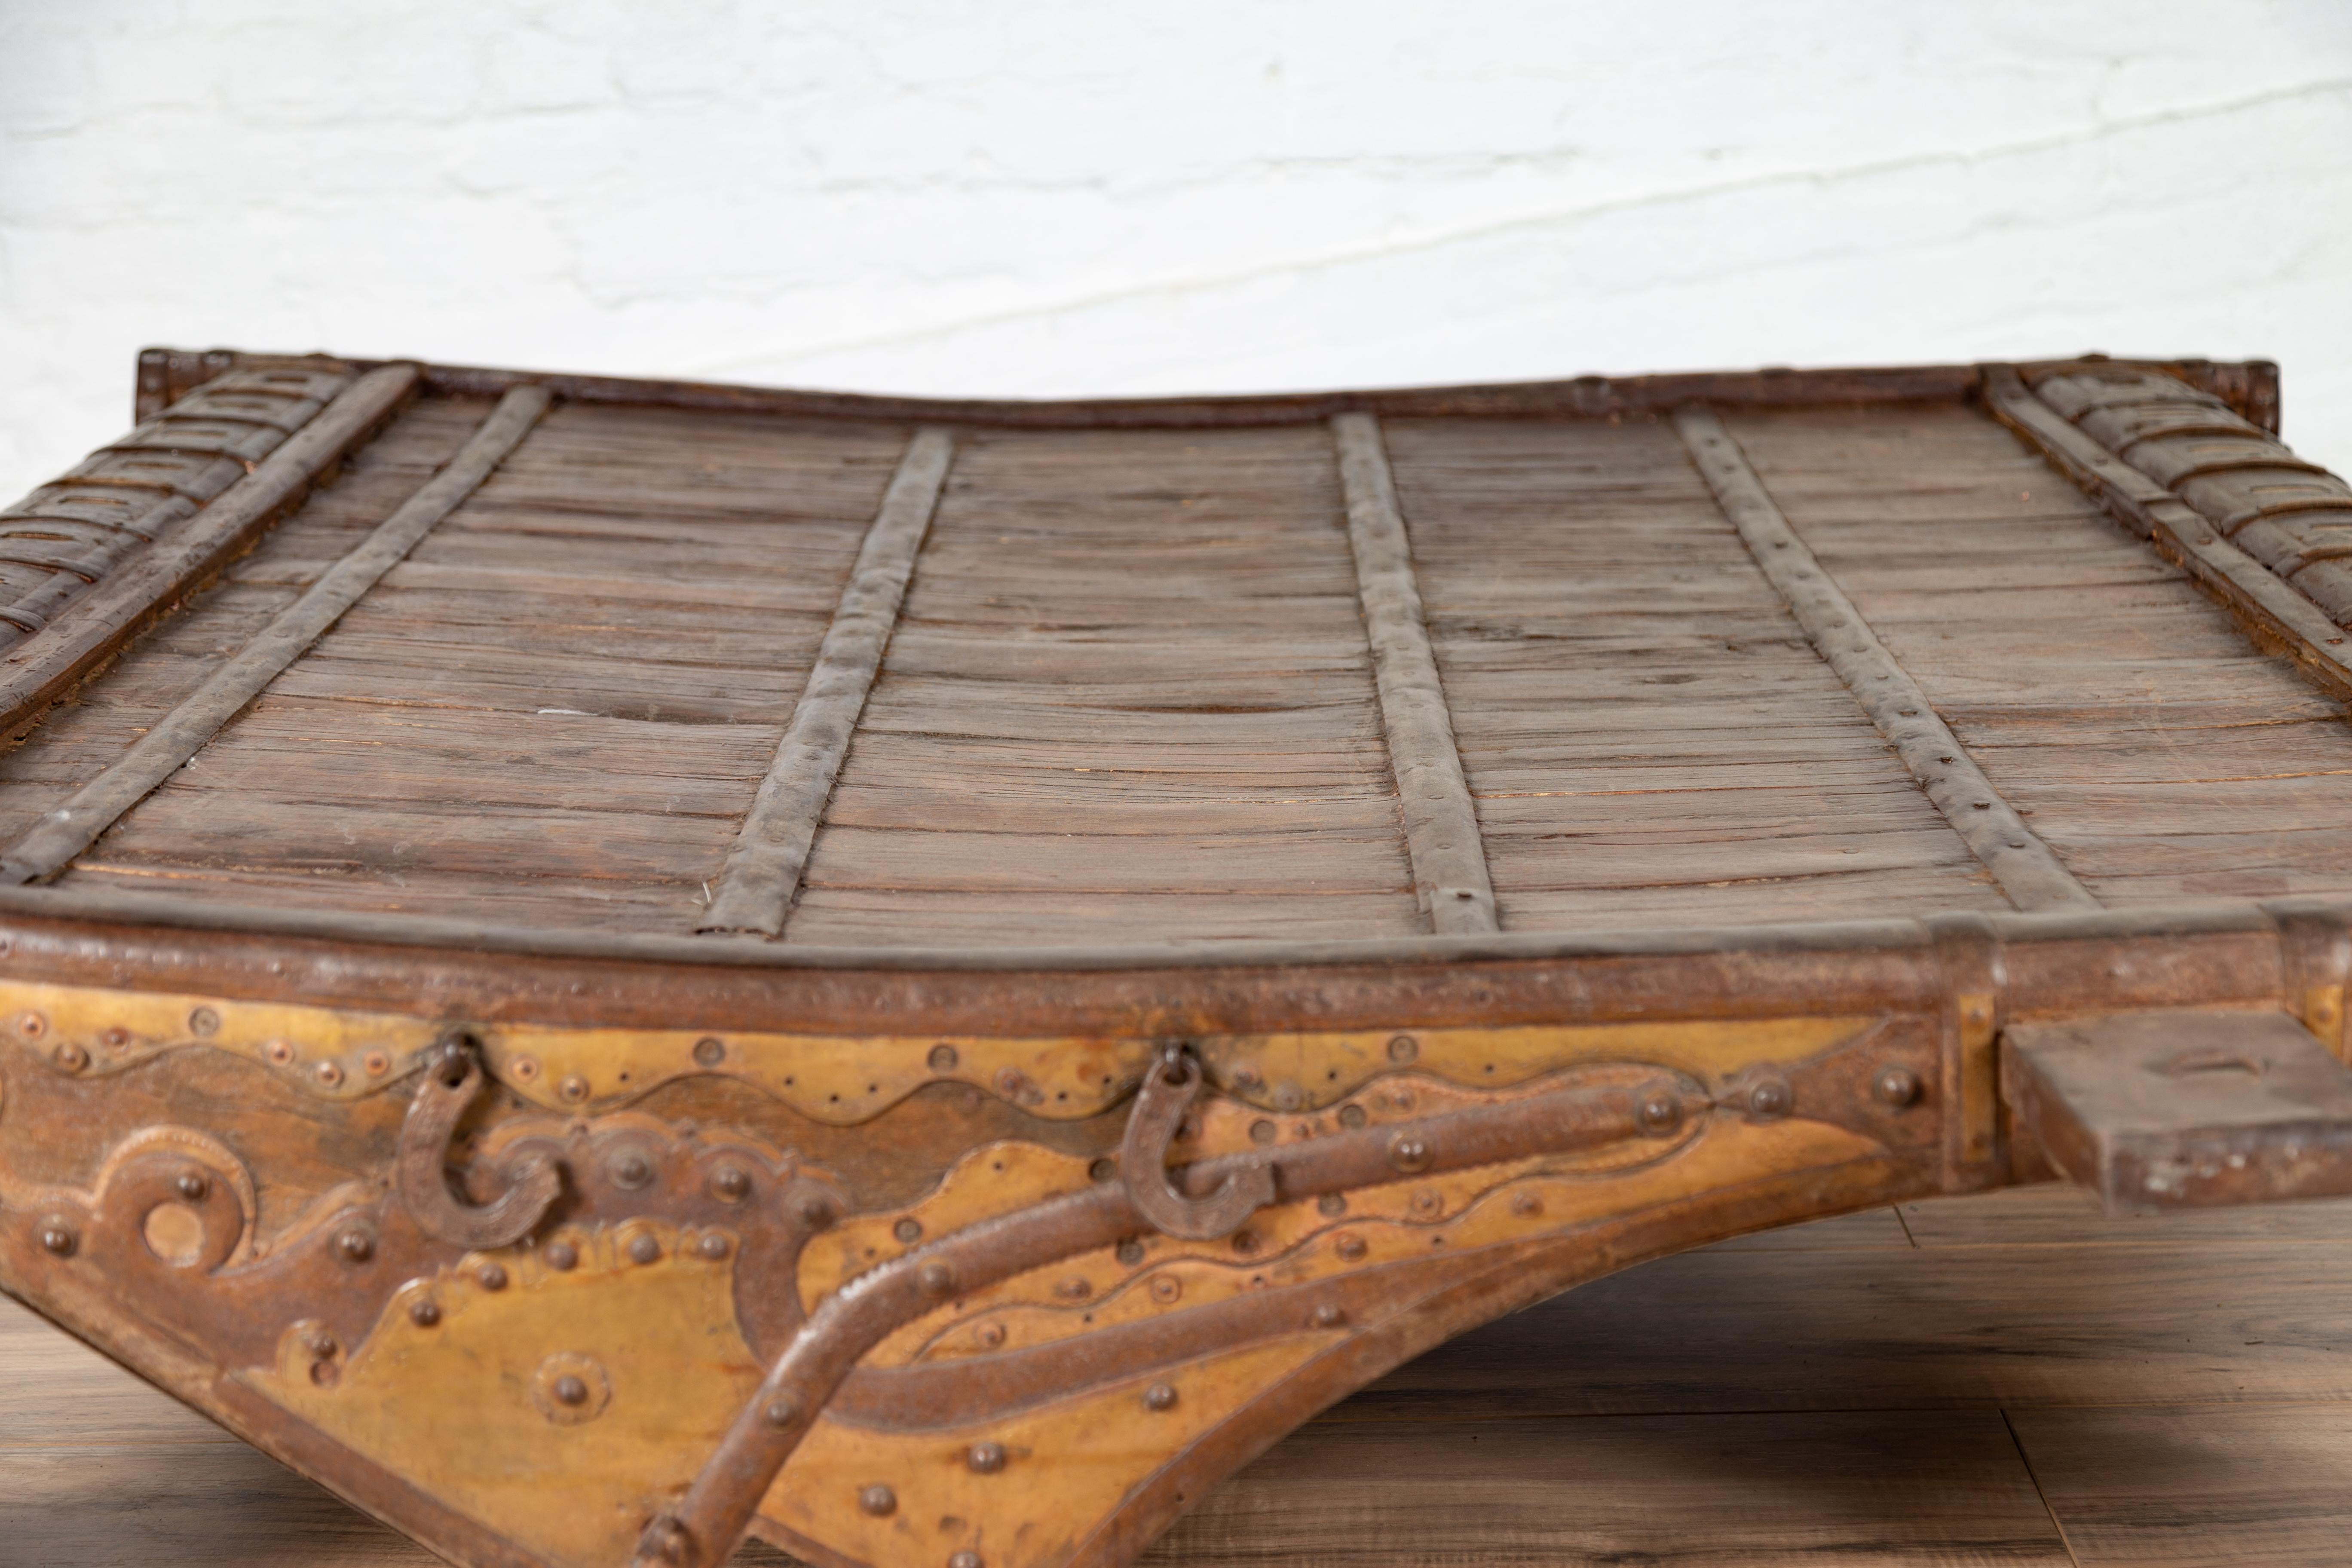 19th Century Antique Indian Rustic Wooden Ox Cart with Metal Accents Made into a Coffee Table For Sale